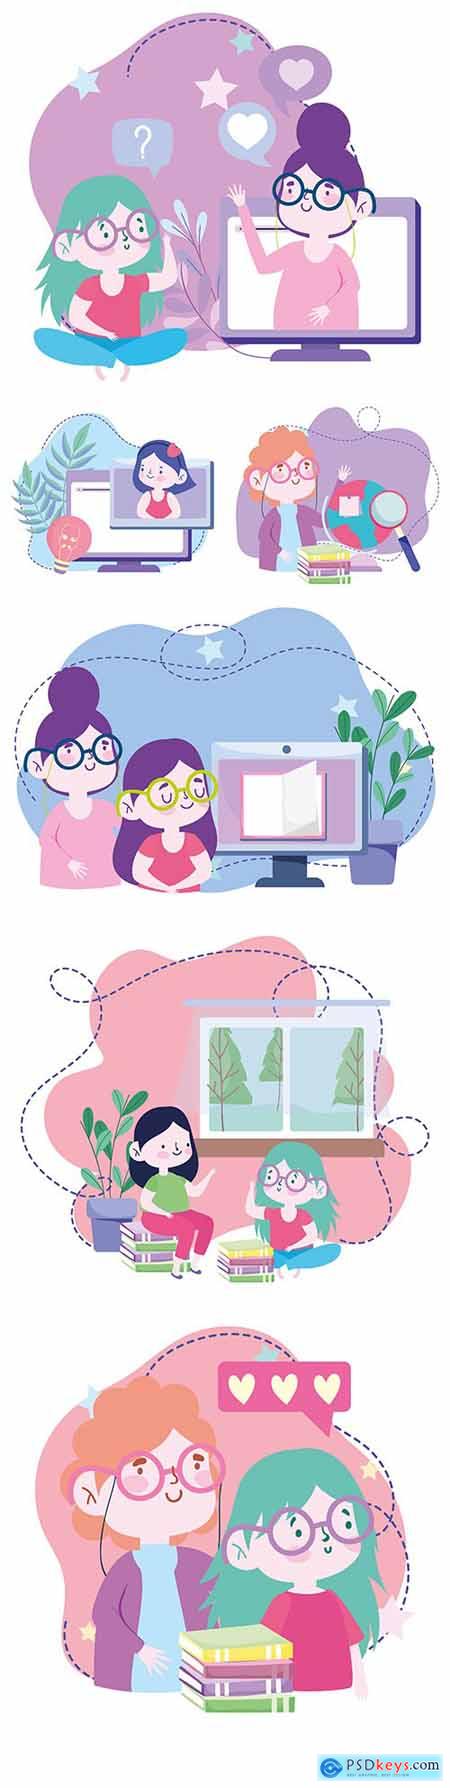 Online education and homework painted flat illustrations